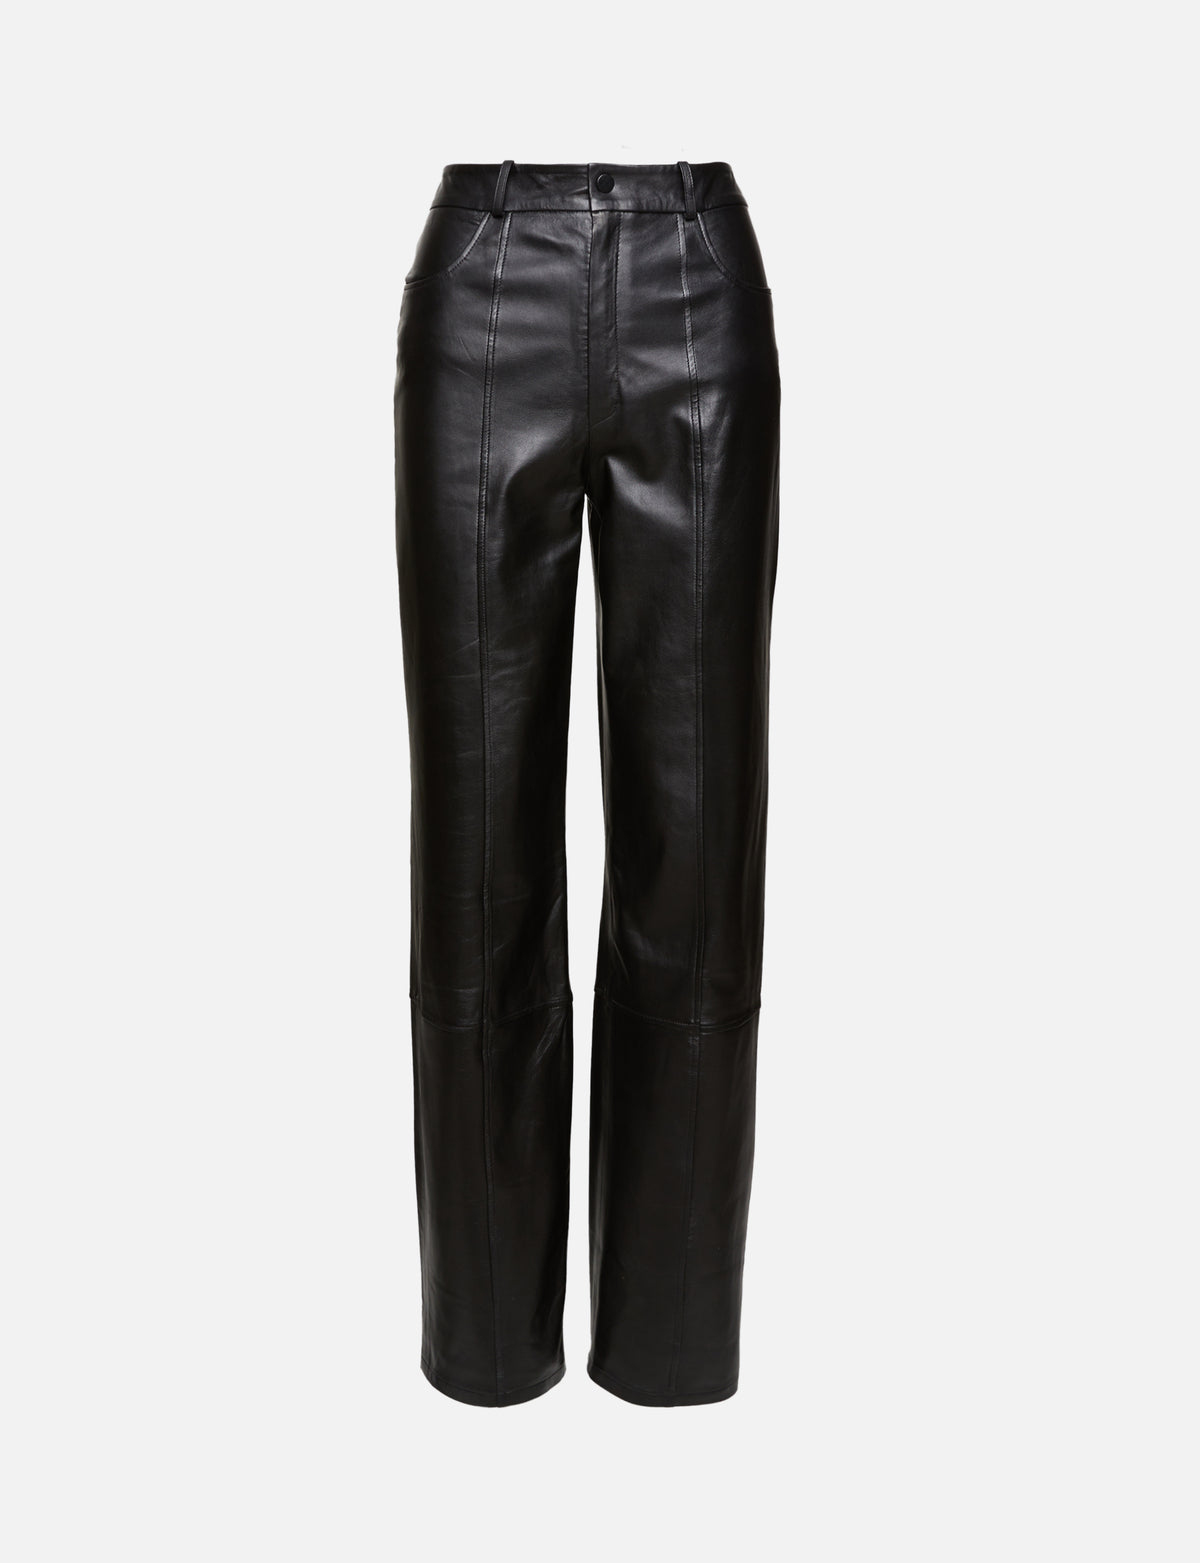 view 5 - High Waist Loose Leather Pant